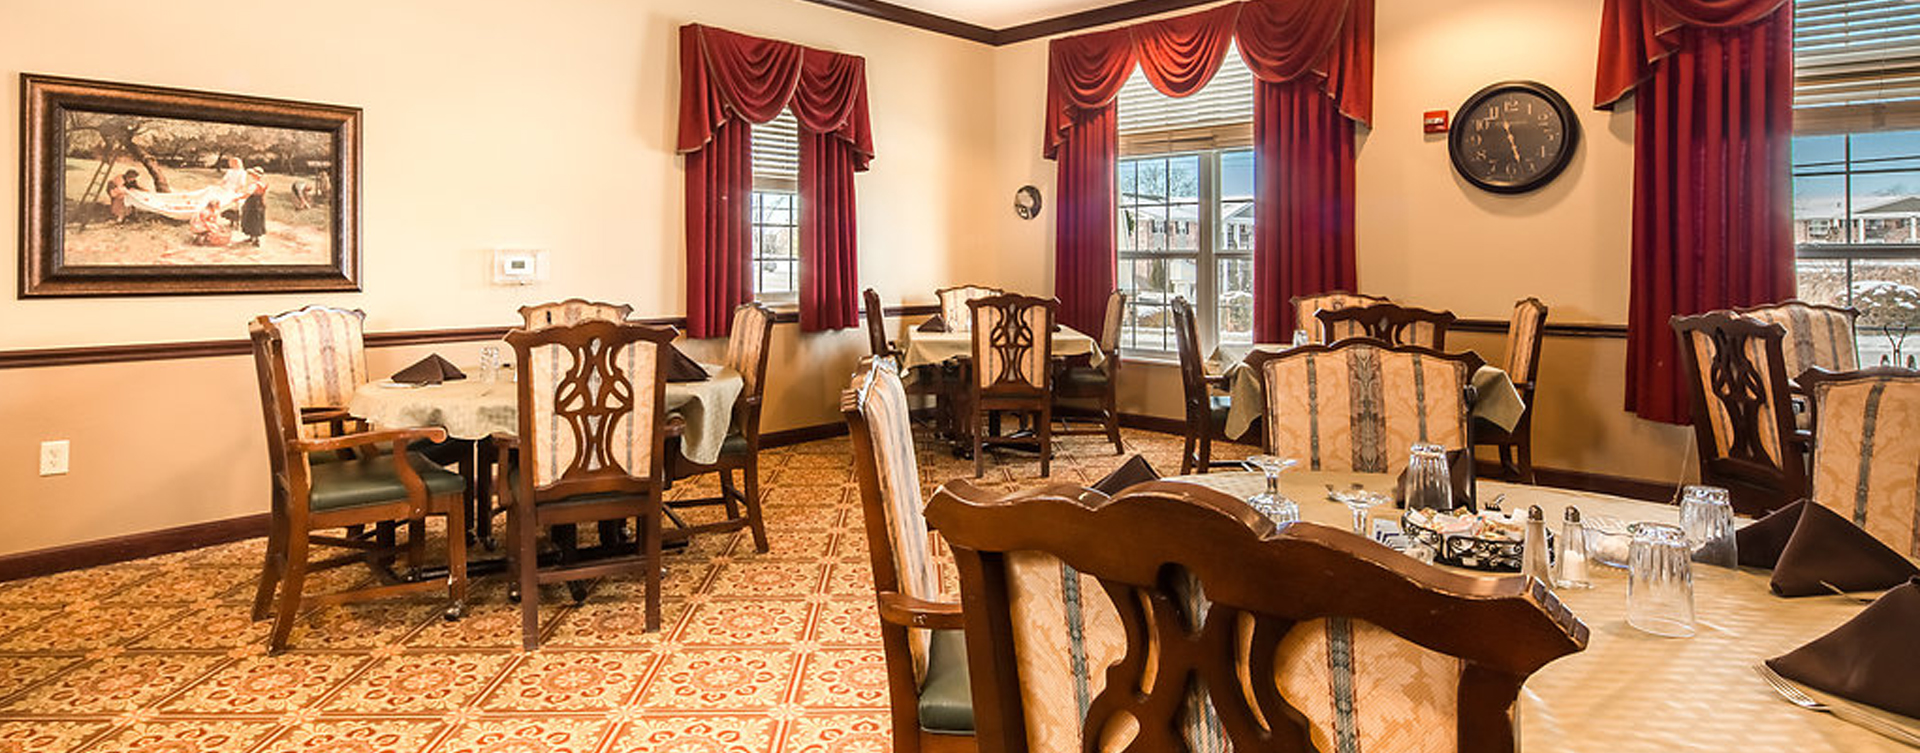 Enjoy restaurant -style meals served three times a day in our dining room at Bickford of Okemos